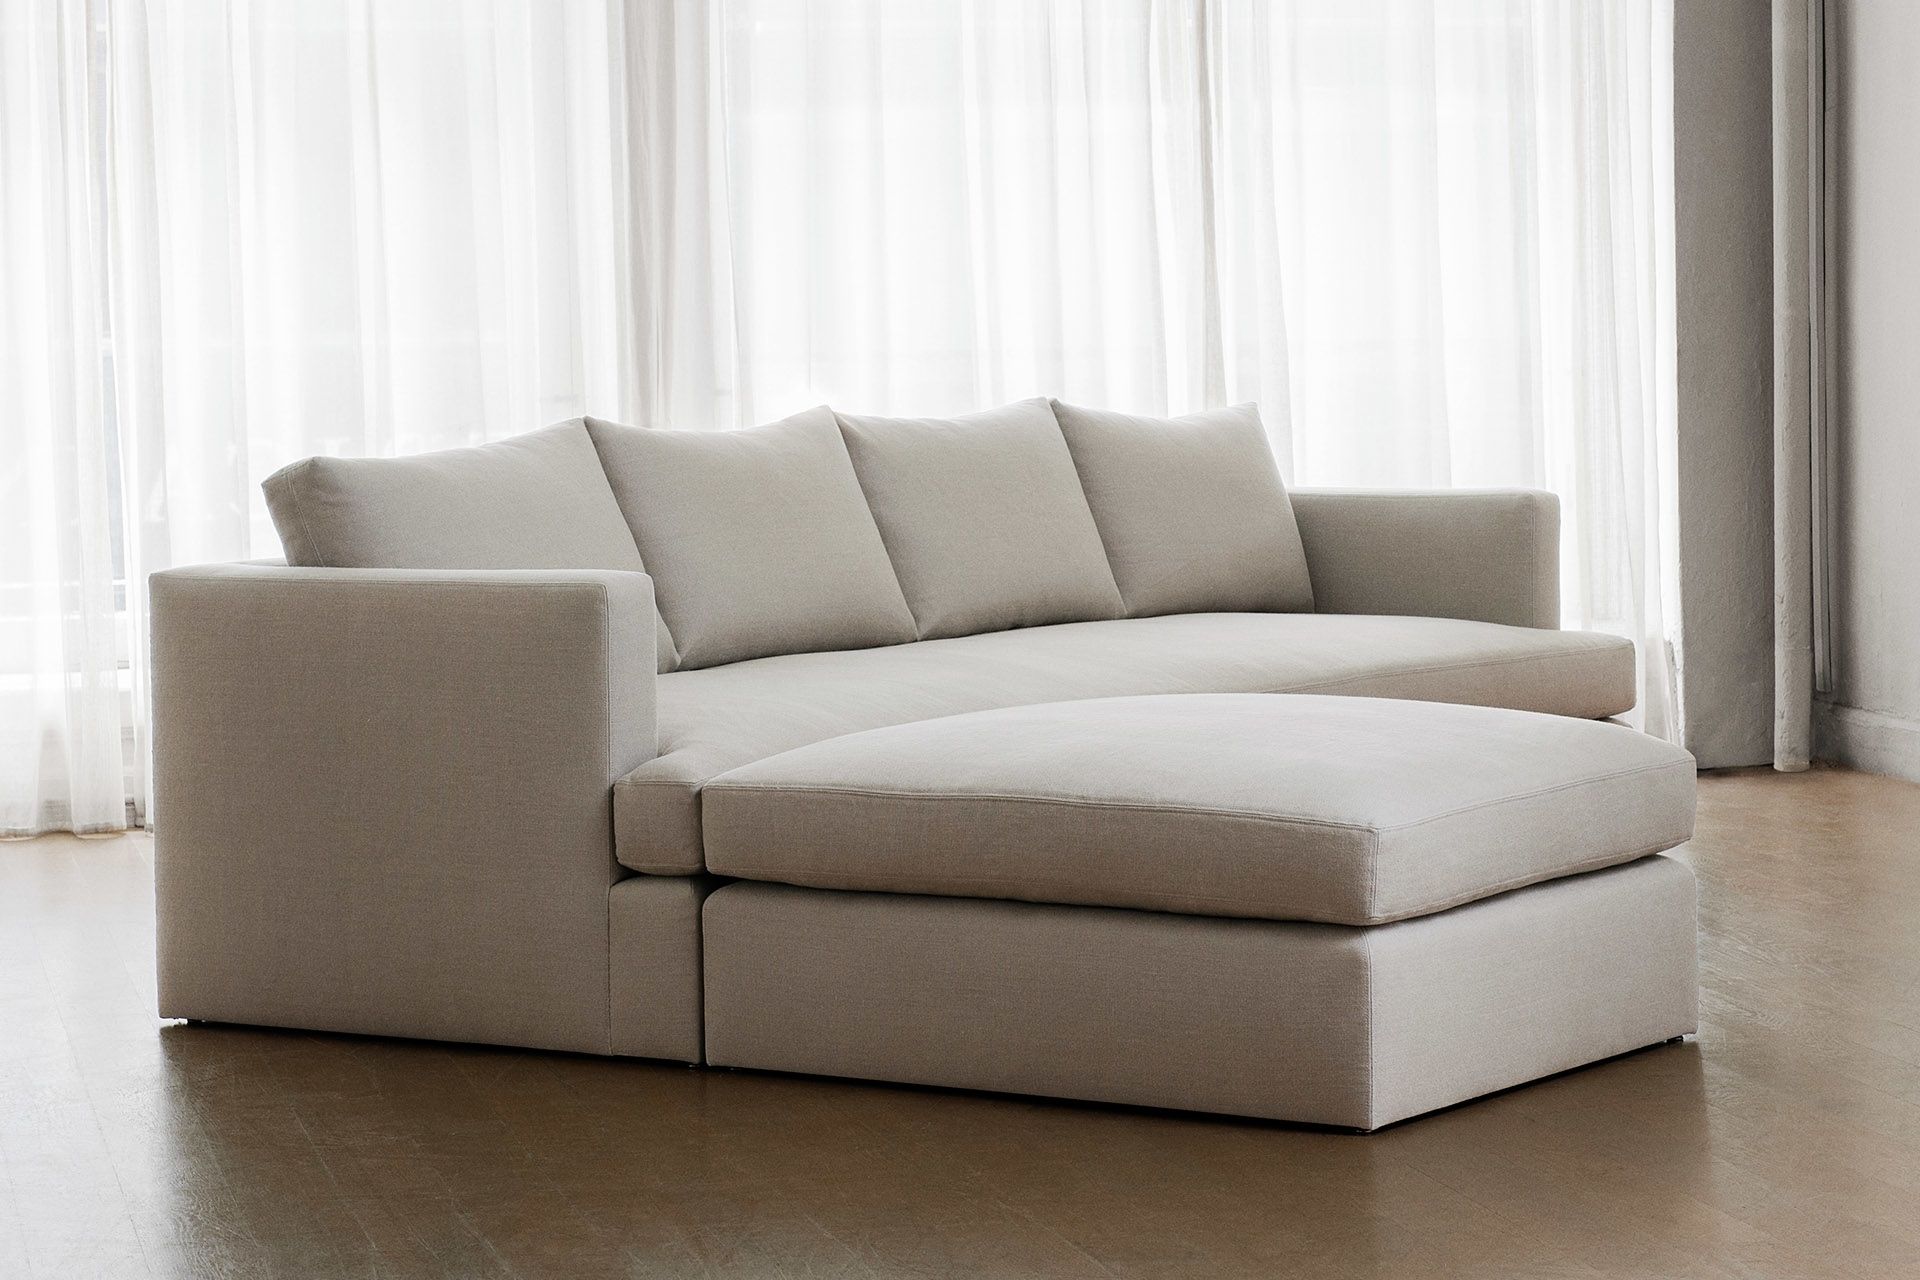 Inspirational Sofa With Ottoman 45 About Remodel Office Sofa Ideas For Popular Sofas With Ottoman (View 2 of 20)